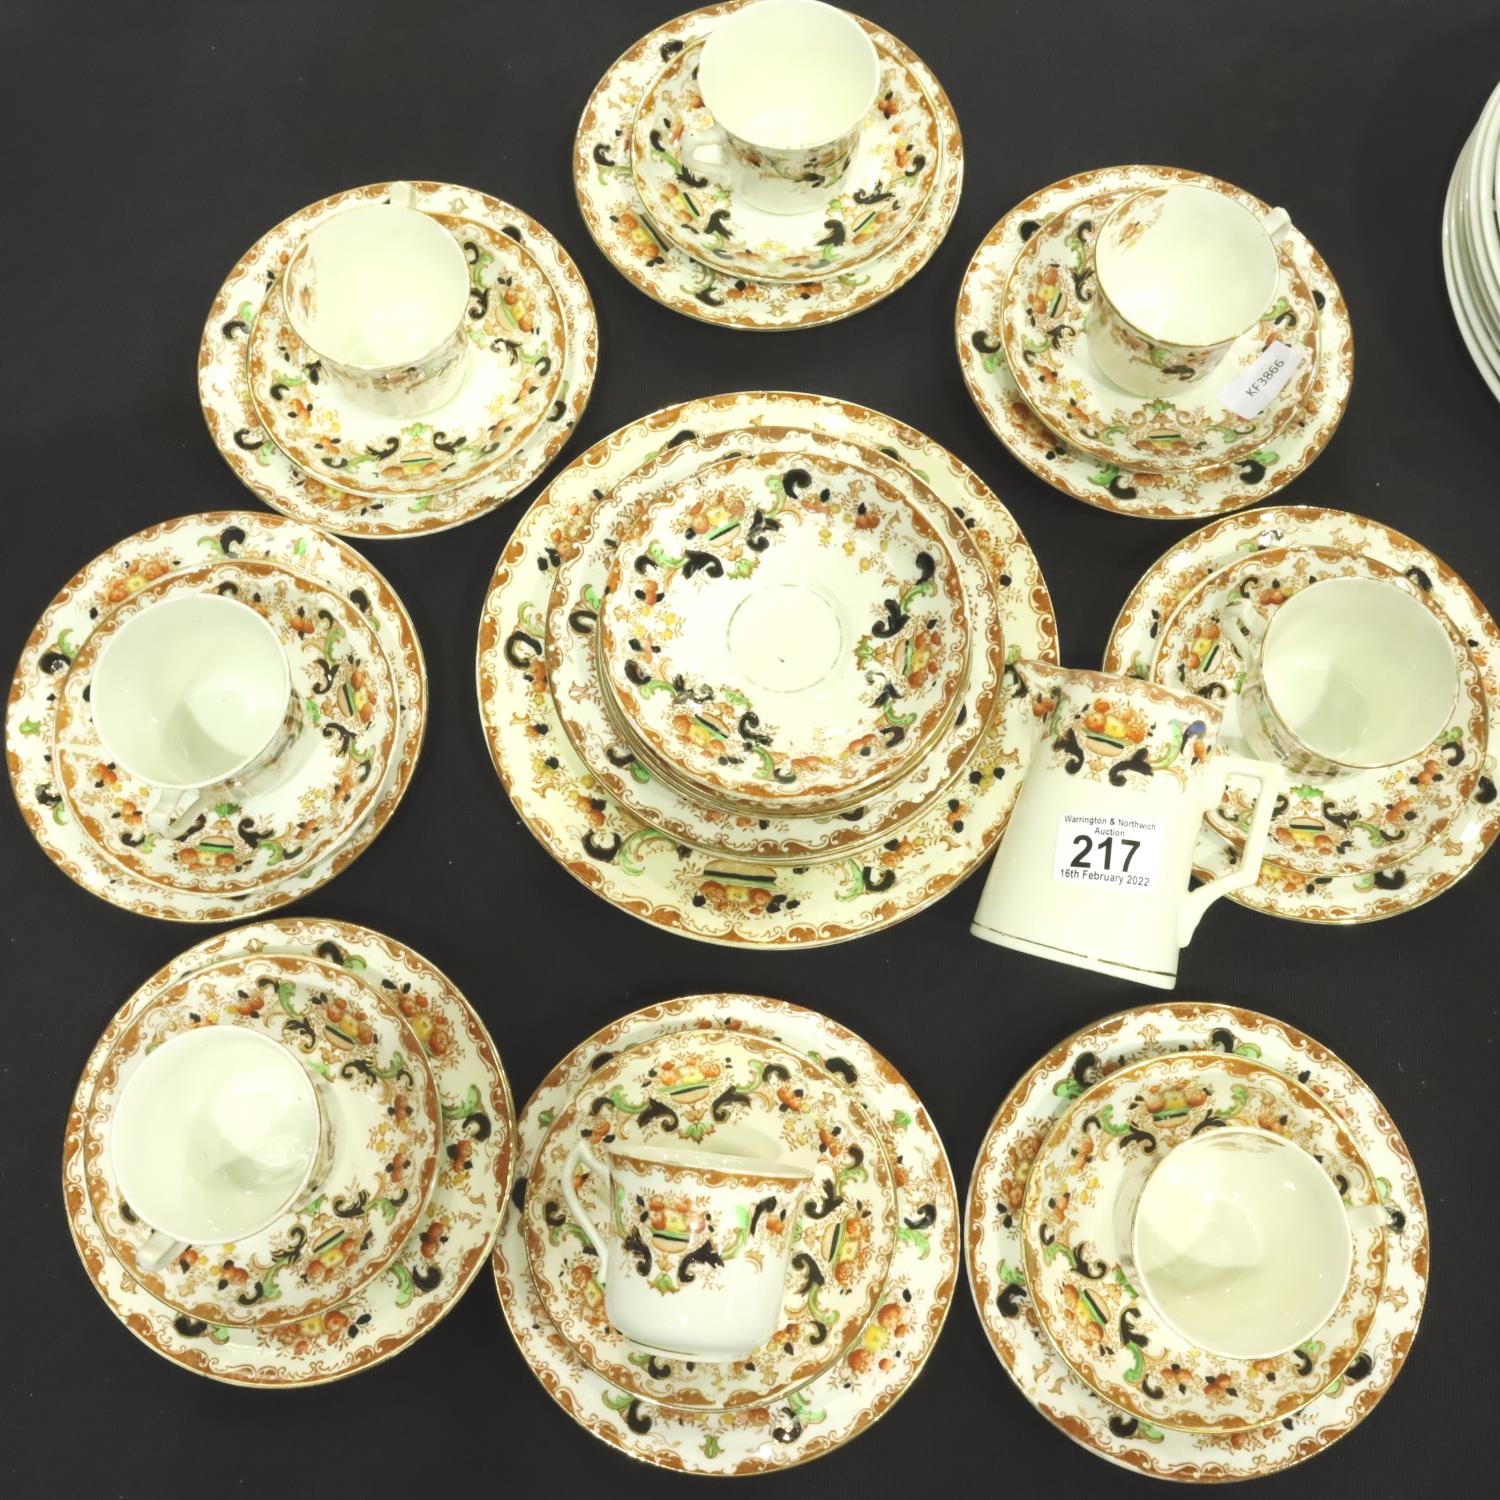 Edwardian tea service of thirty pieces with gilt and floral decoration, signs of use and wear